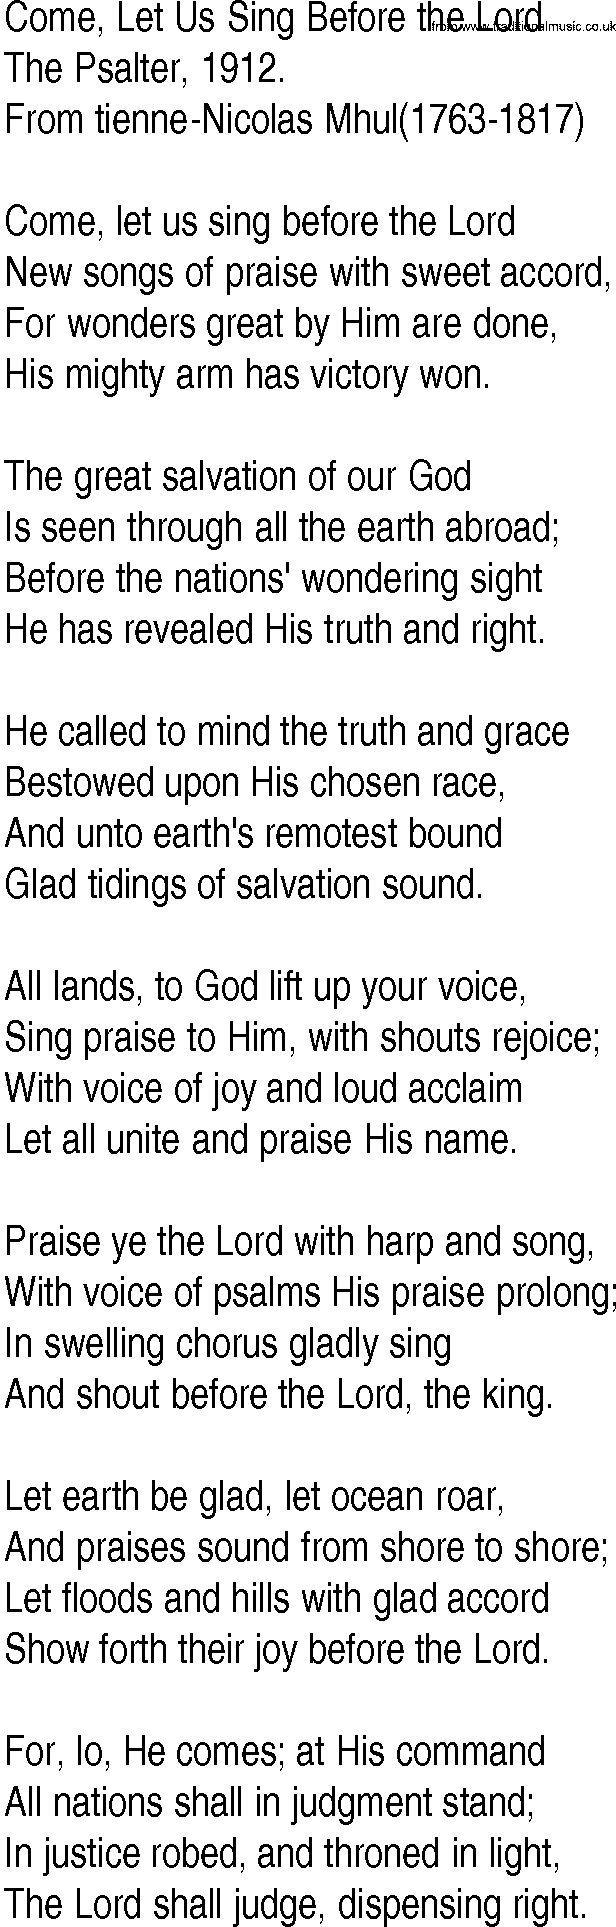 Hymn and Gospel Song: Come, Let Us Sing Before the Lord by The Psalter lyrics